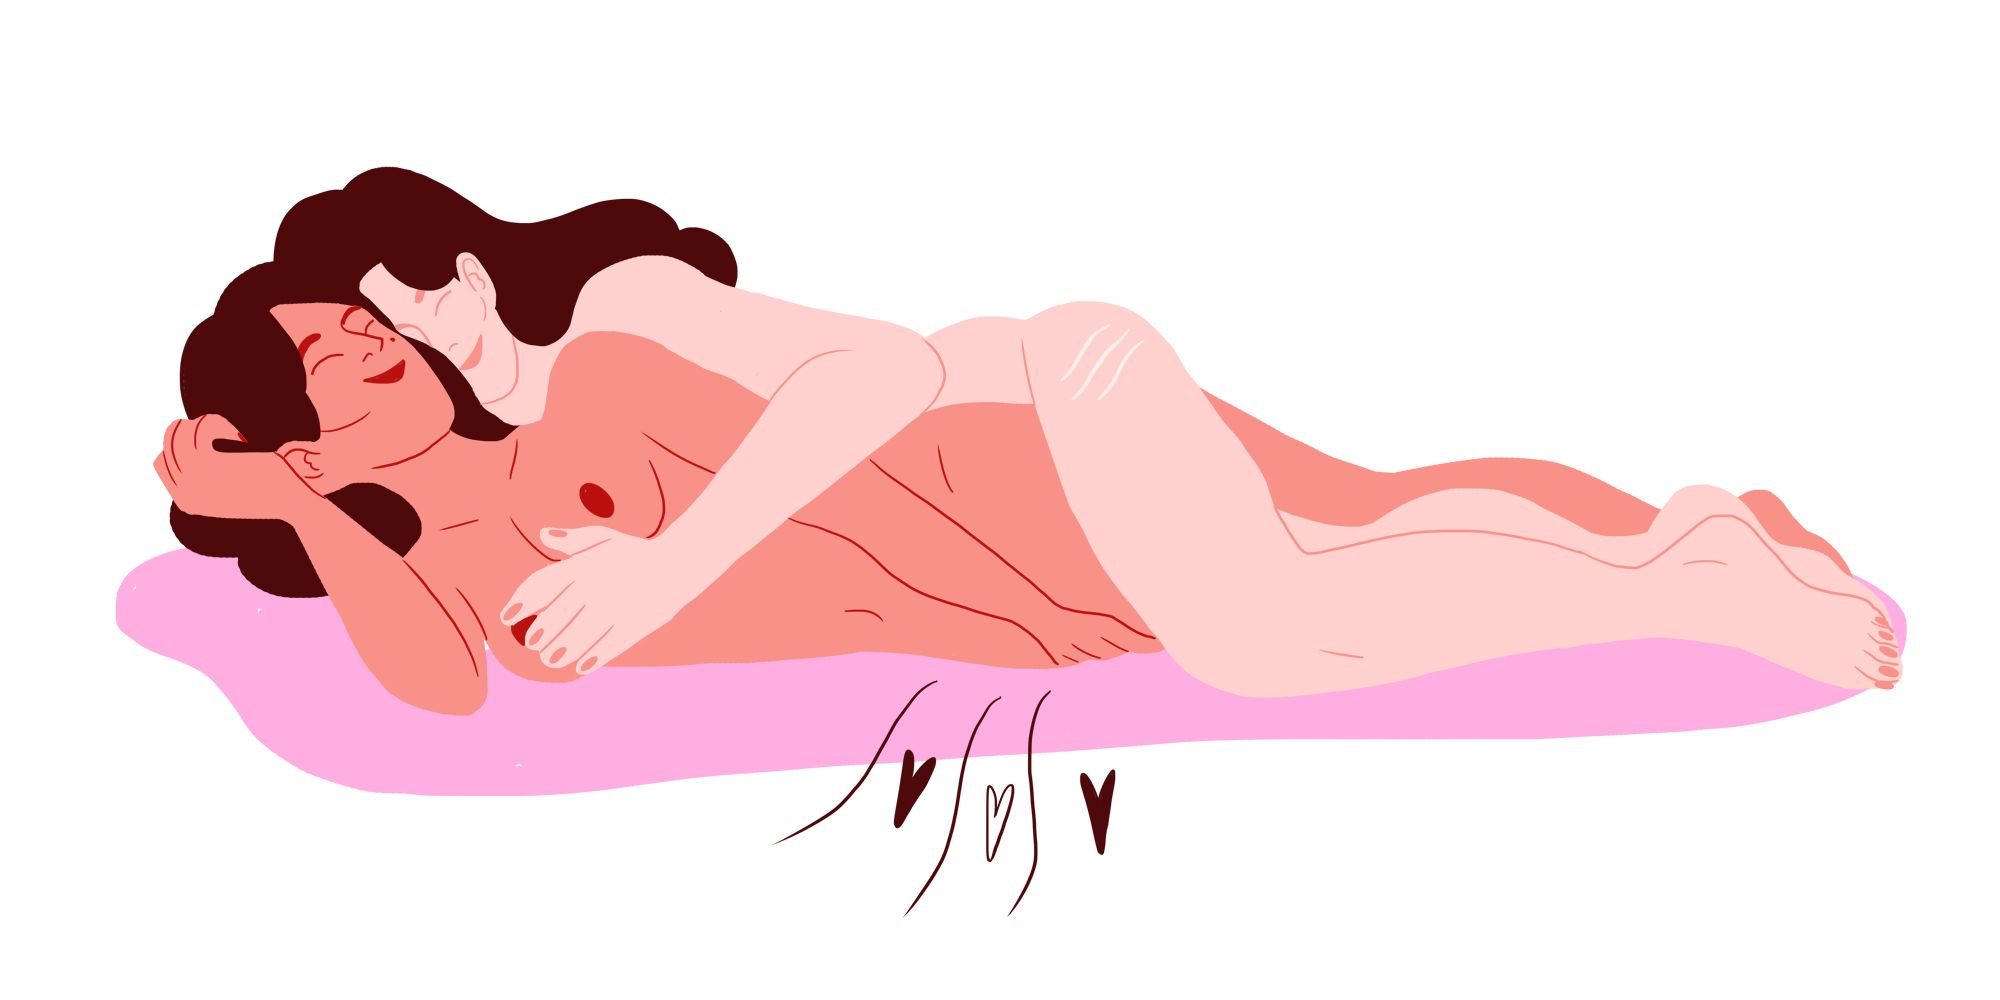 17 First Time Sex Positions - Sex Positions for the First Time